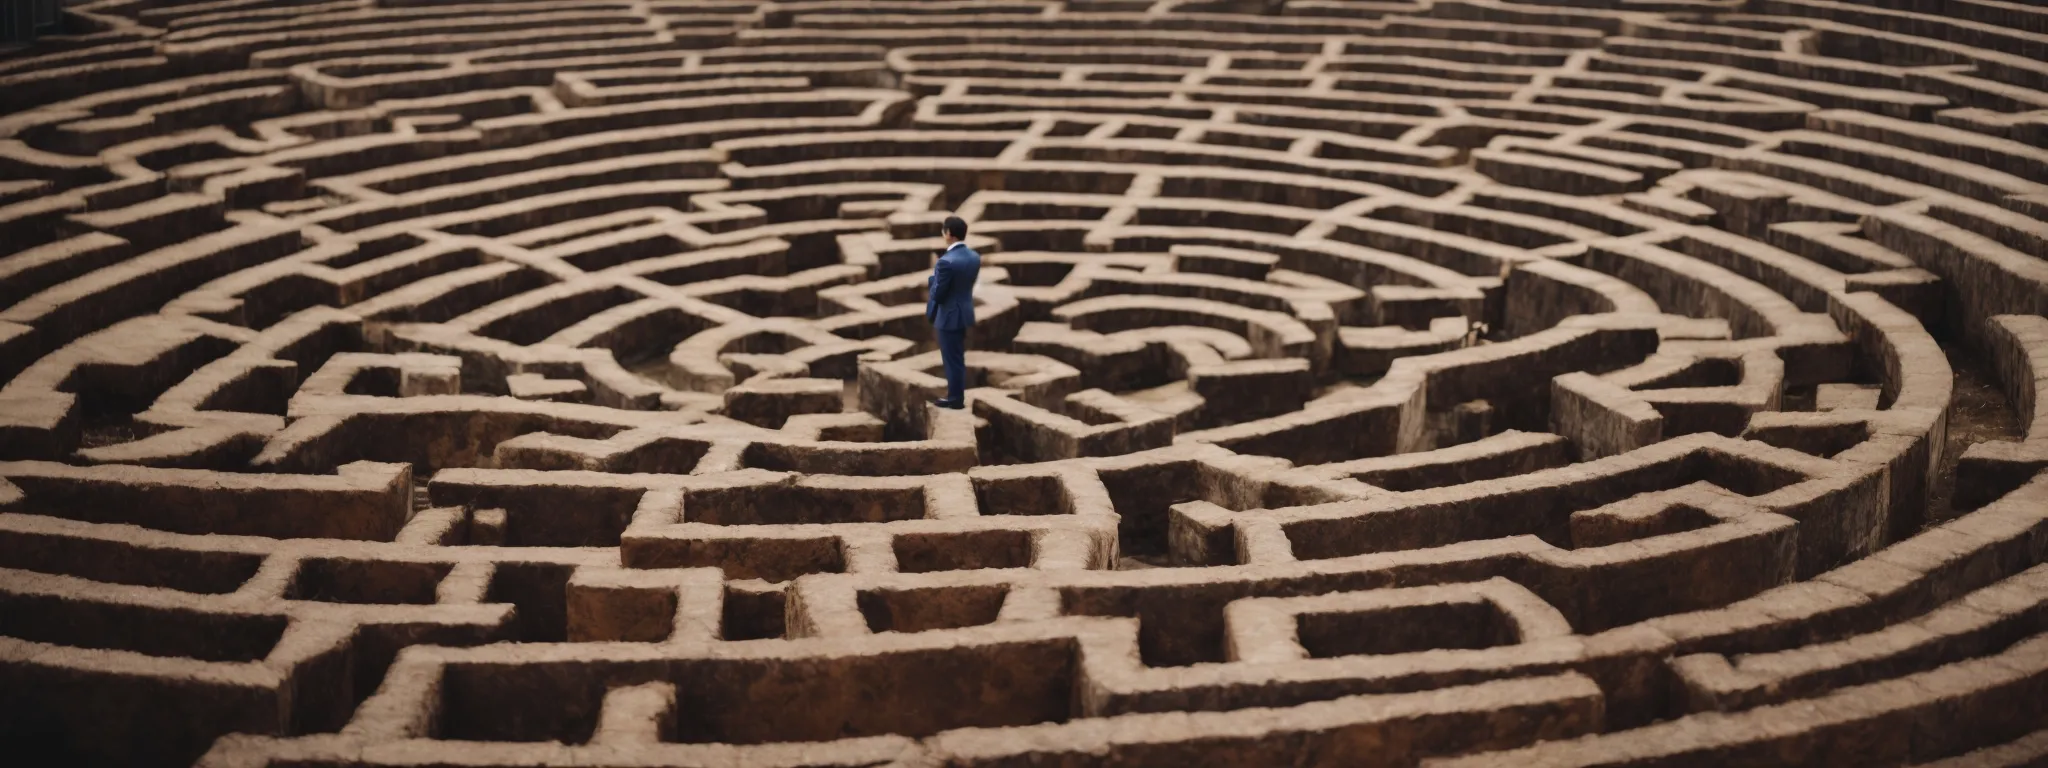 a pensive businessperson contemplating a labyrinth, symbolizing the complexities of seo payment structures.